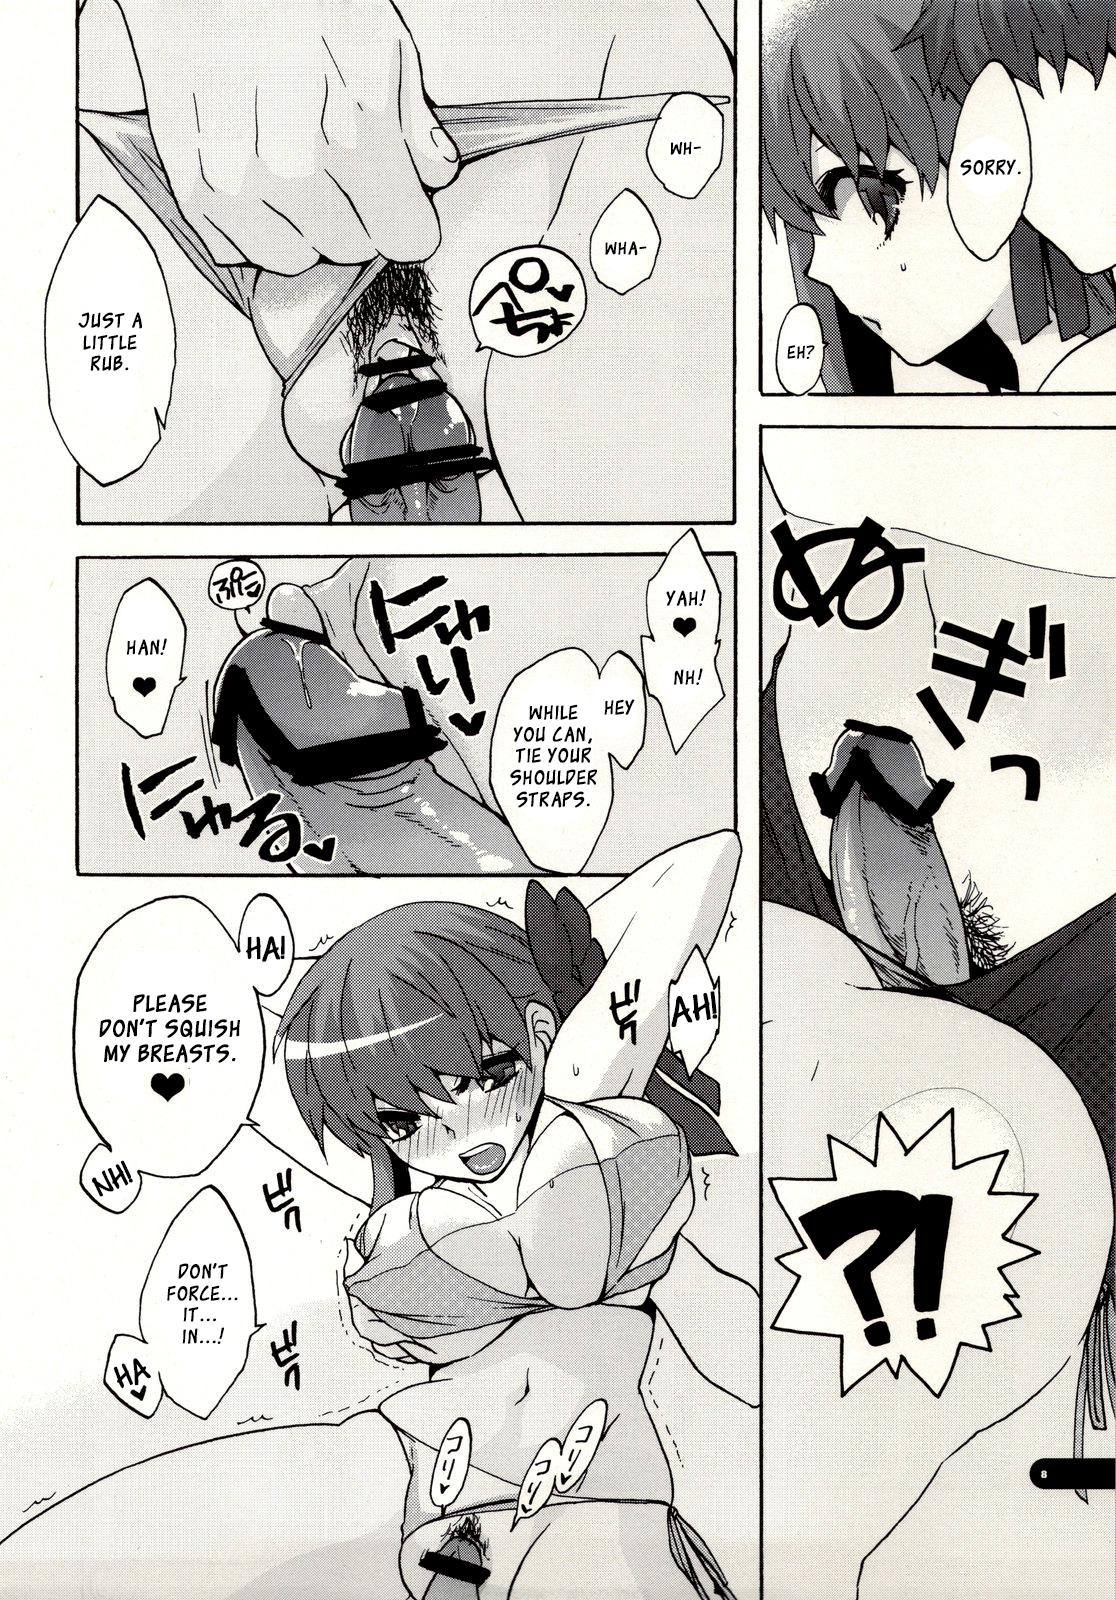 Toilet FOOL POOL - Fate stay night Euro - Page 8